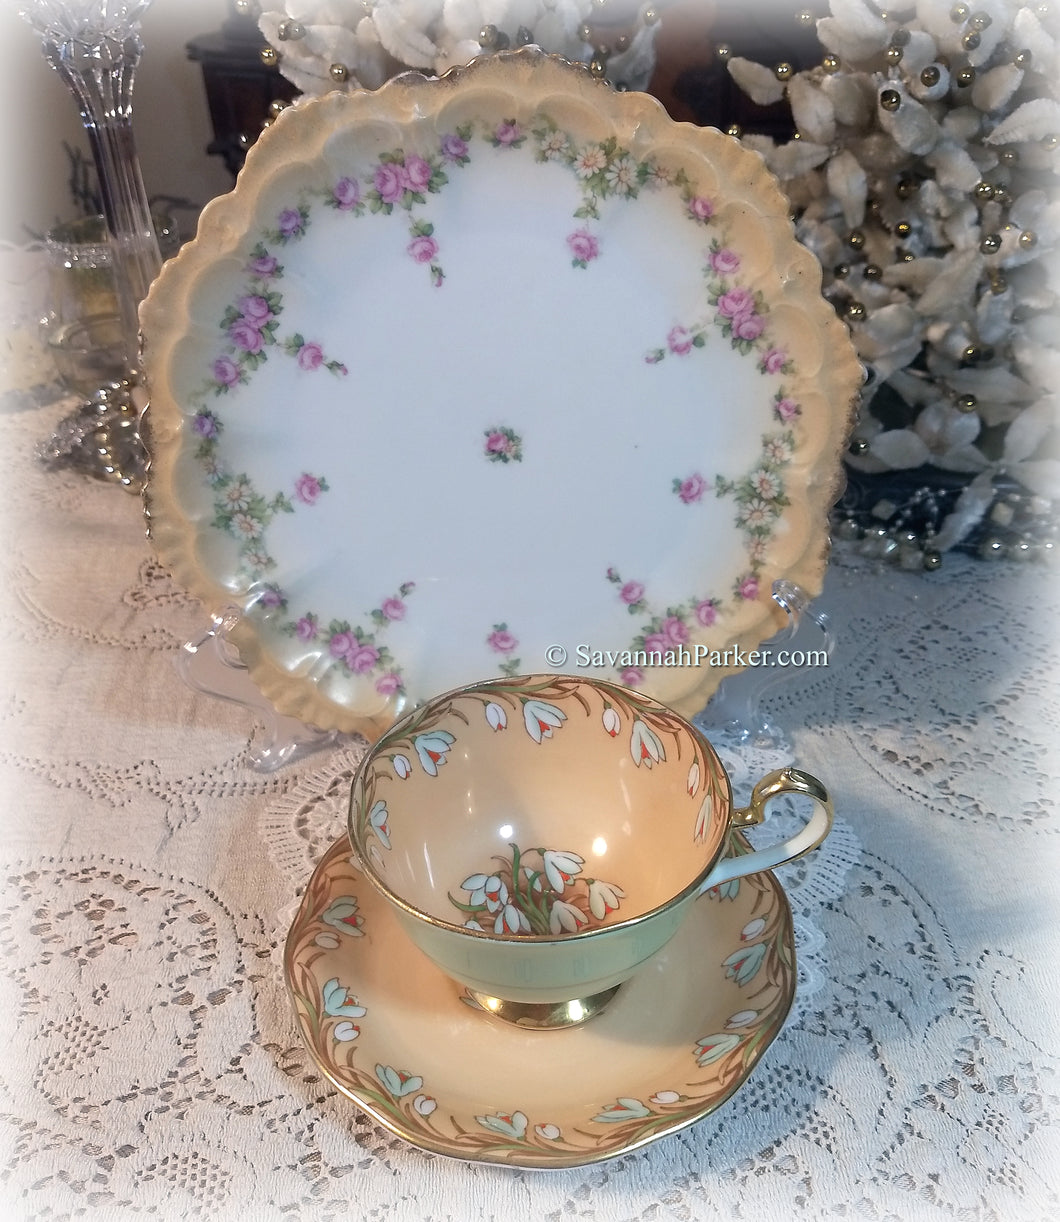 SOLD Dainty Vintage Apricot Queen Anne Hand Painted Bone China Snowdrops and M Z Austria China Tea Trio, Cup, Saucer, Plate - Shabby Chic